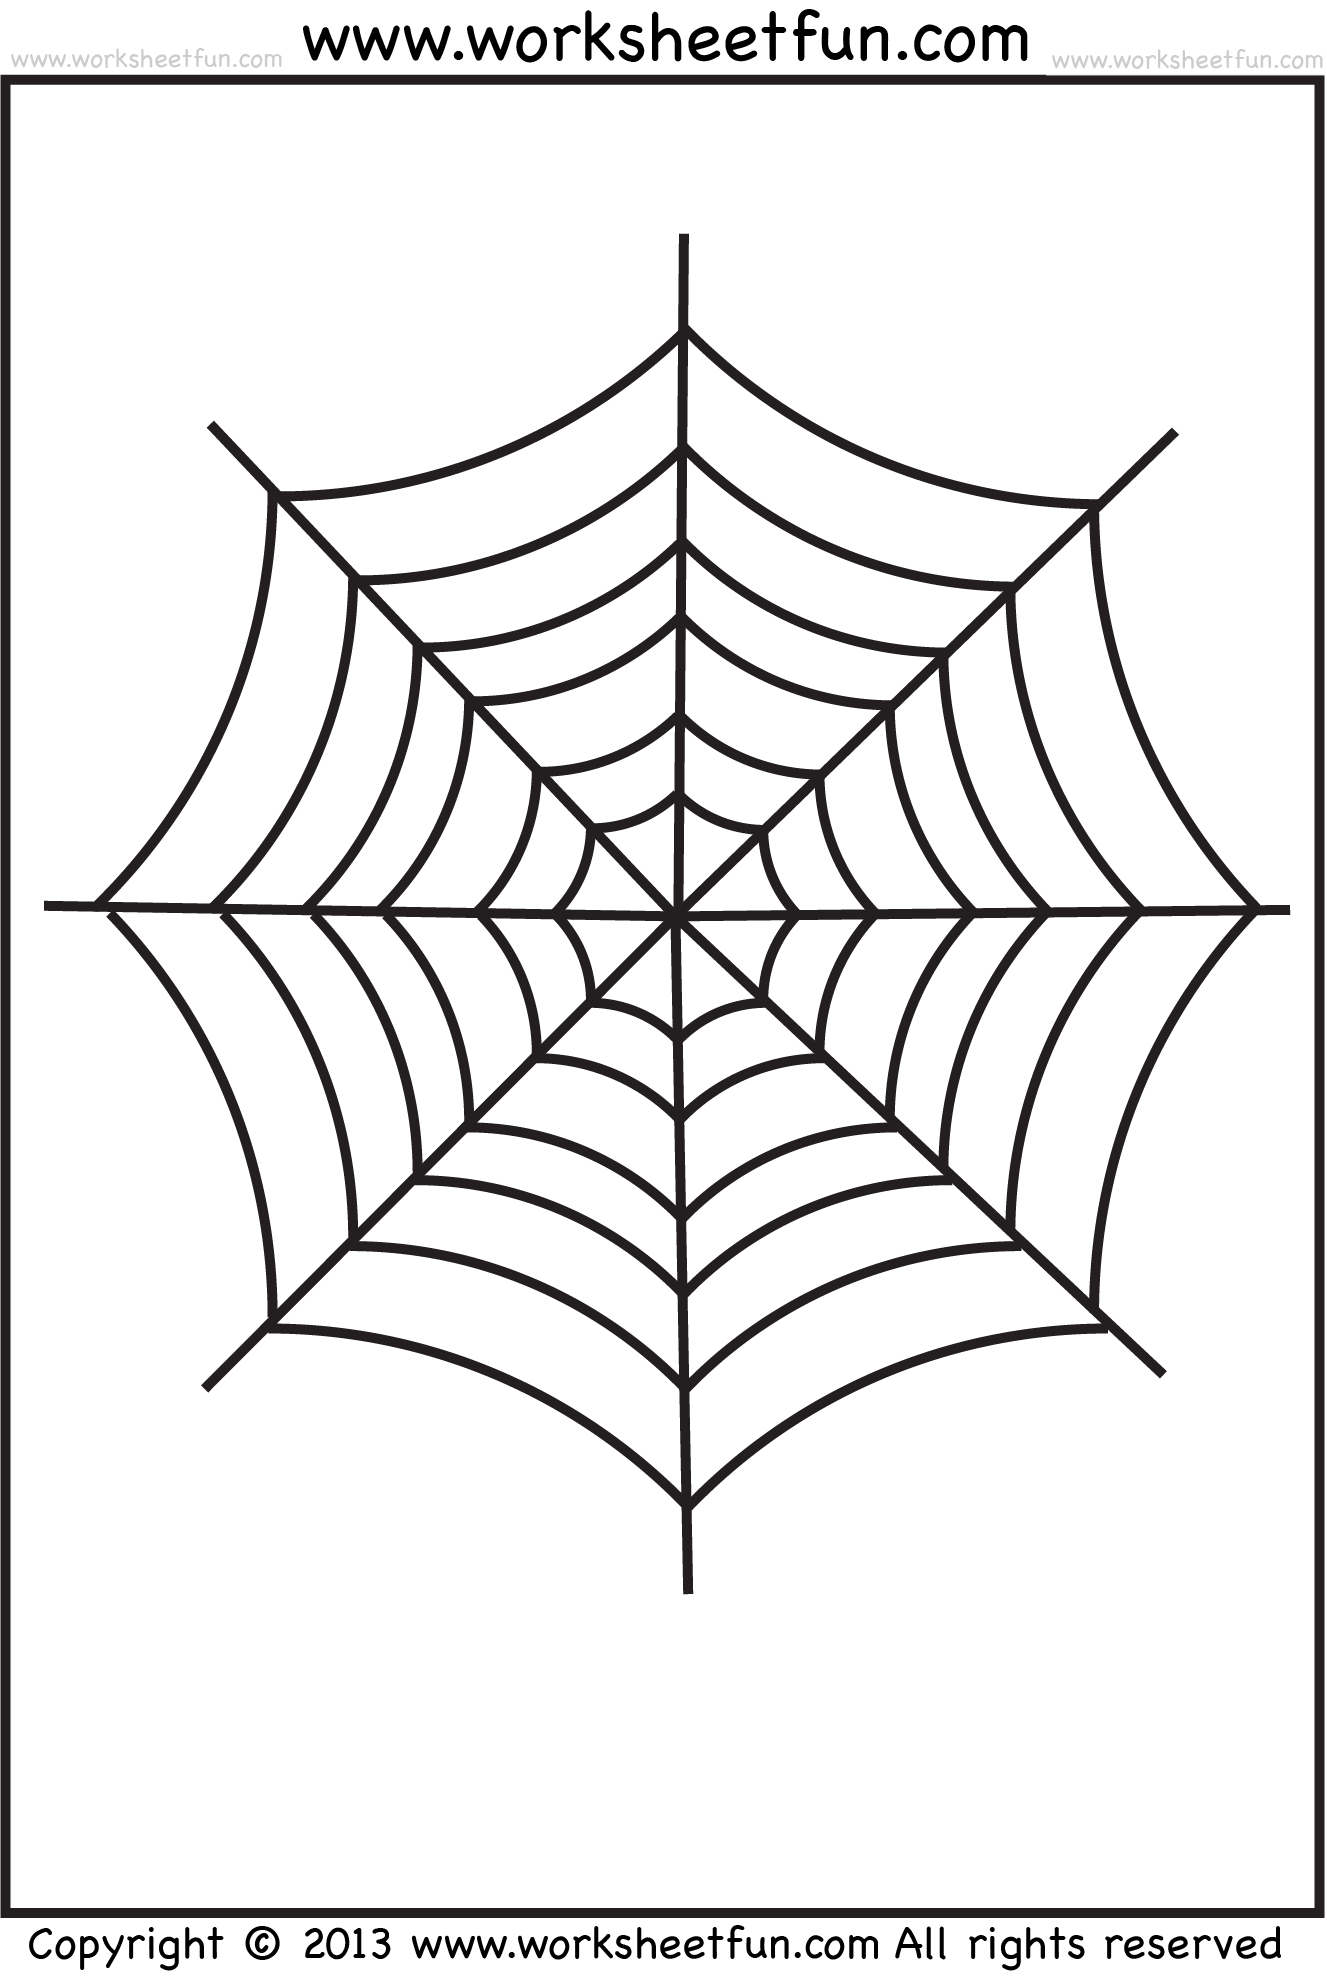 Free Printable Spider Web Template Printable Form, Templates and Letter